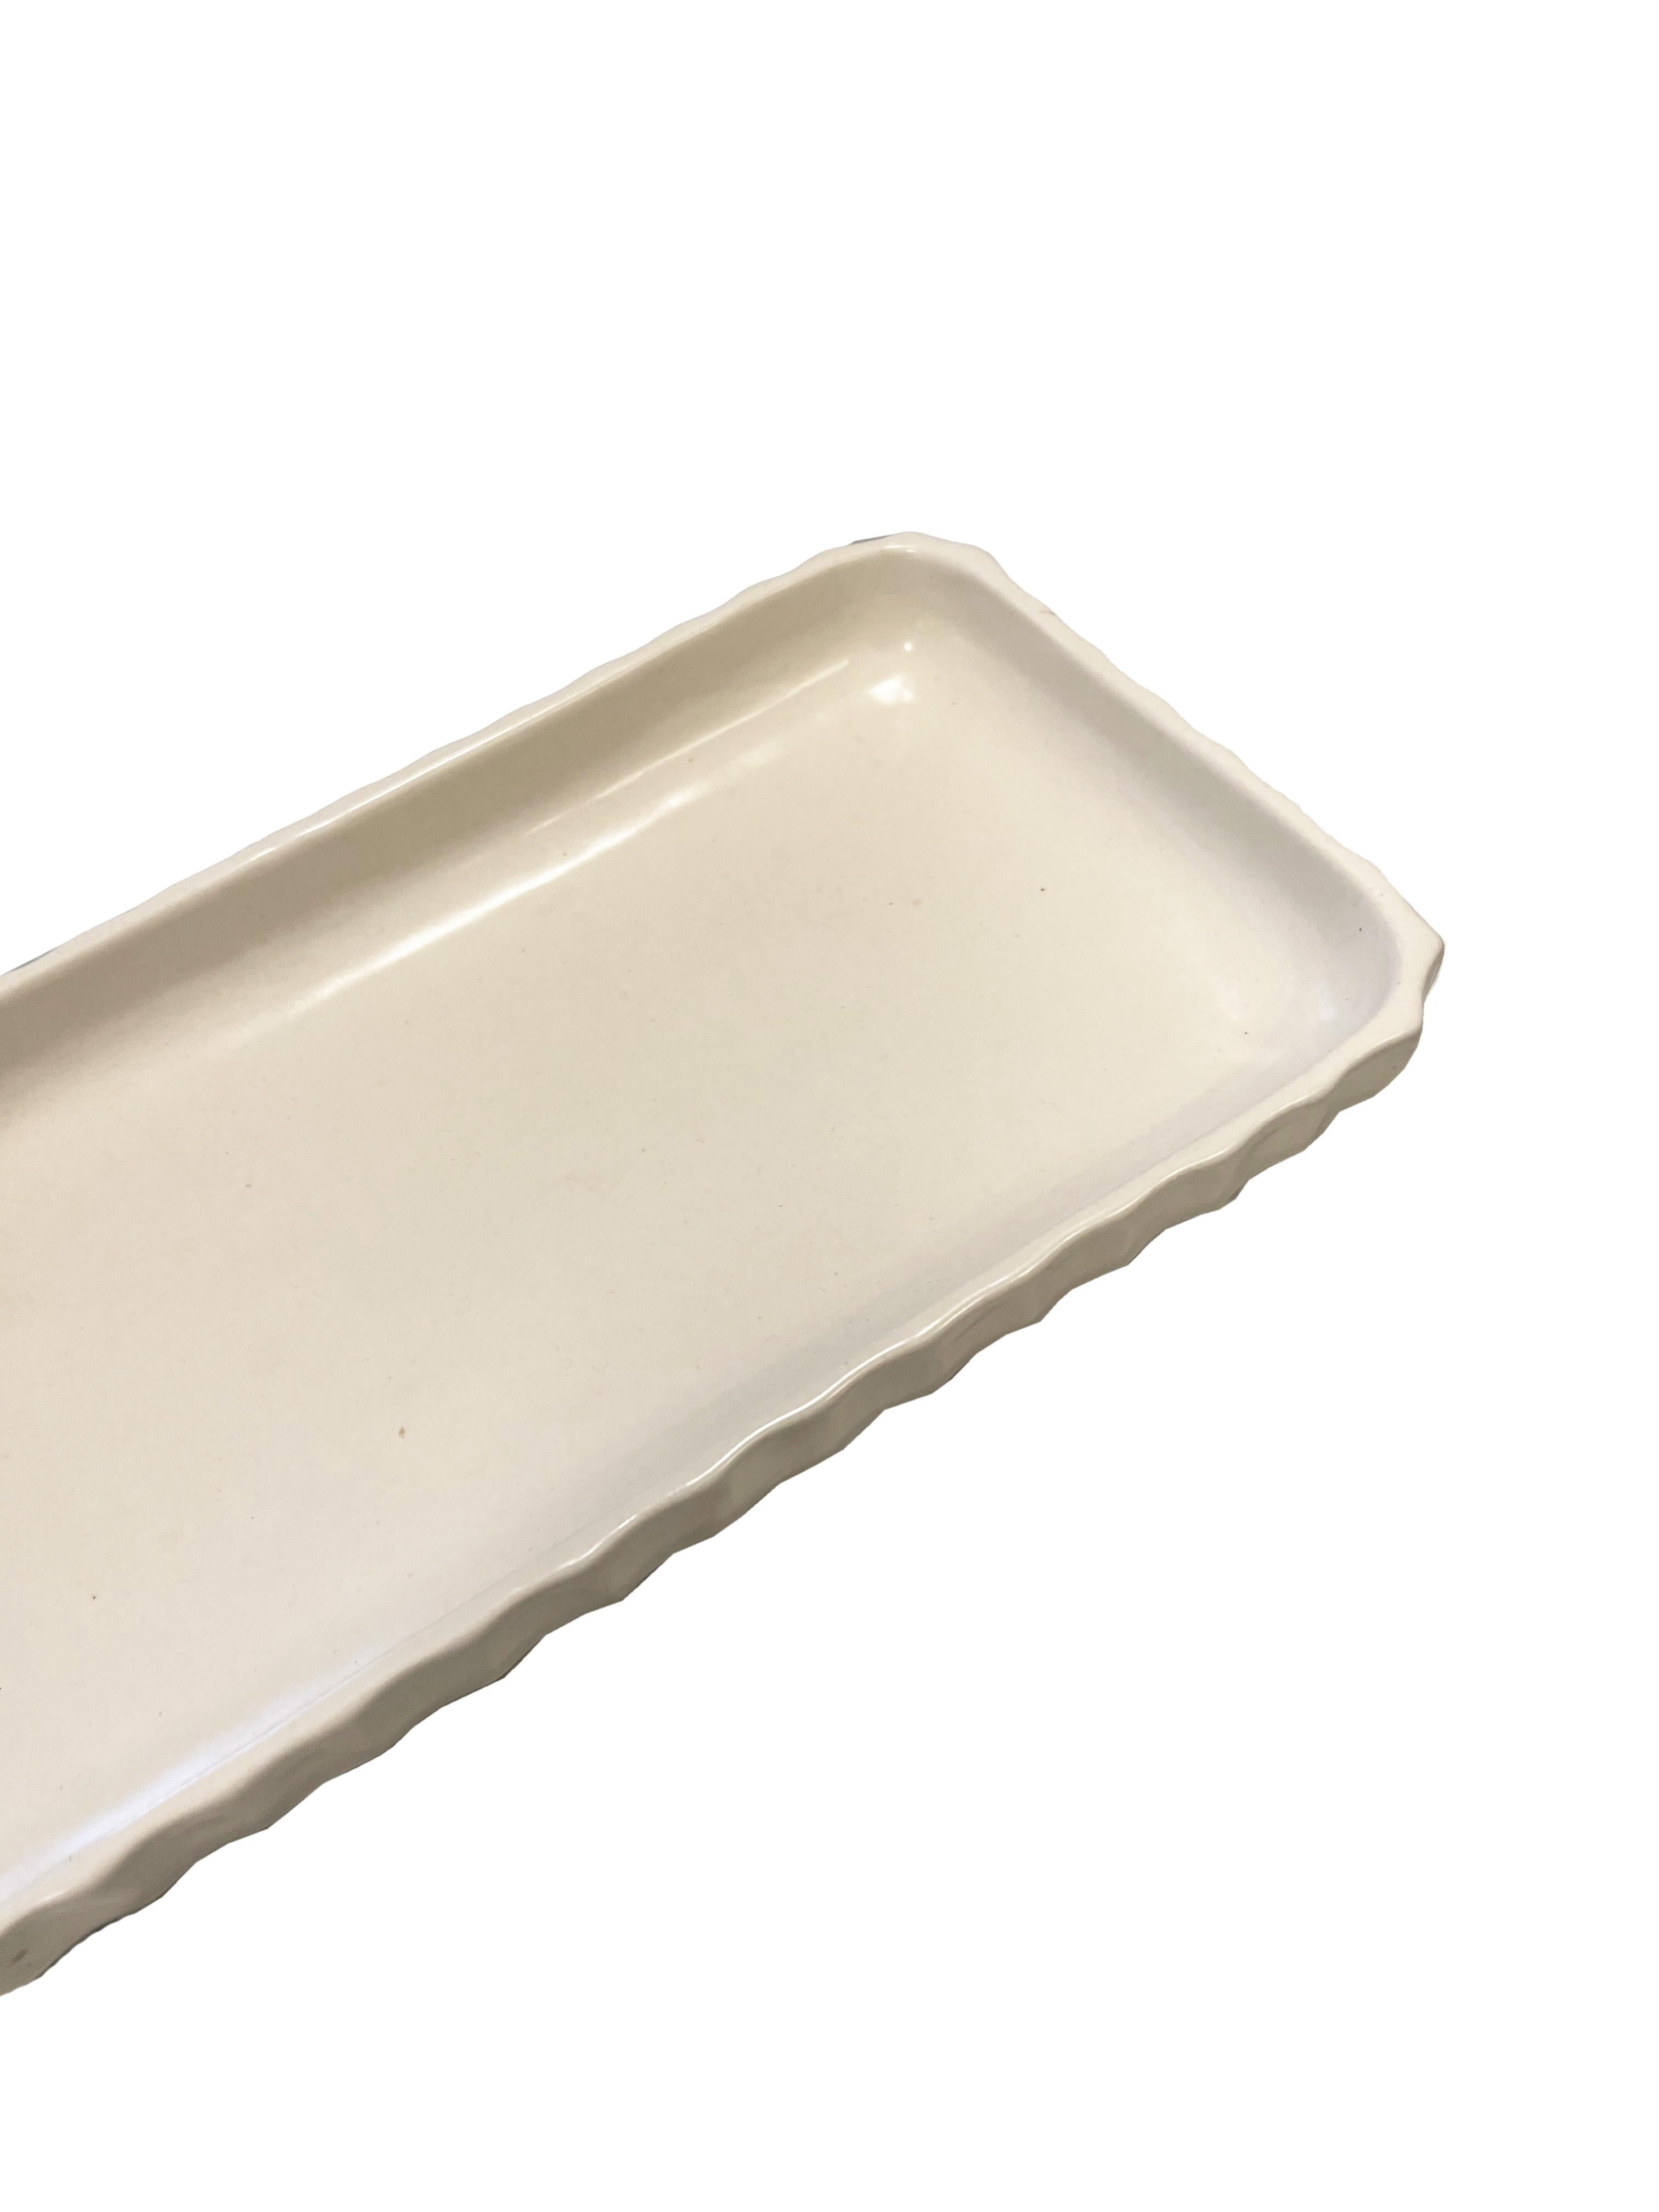 Indulge in the simple elegance of this ivory white ceramic tray, thoughtfully designed by Waterworks. This exquisite piece stands out with its charming scalloped edge detail, a design choice that infuses a touch of whimsy and refined grace into any